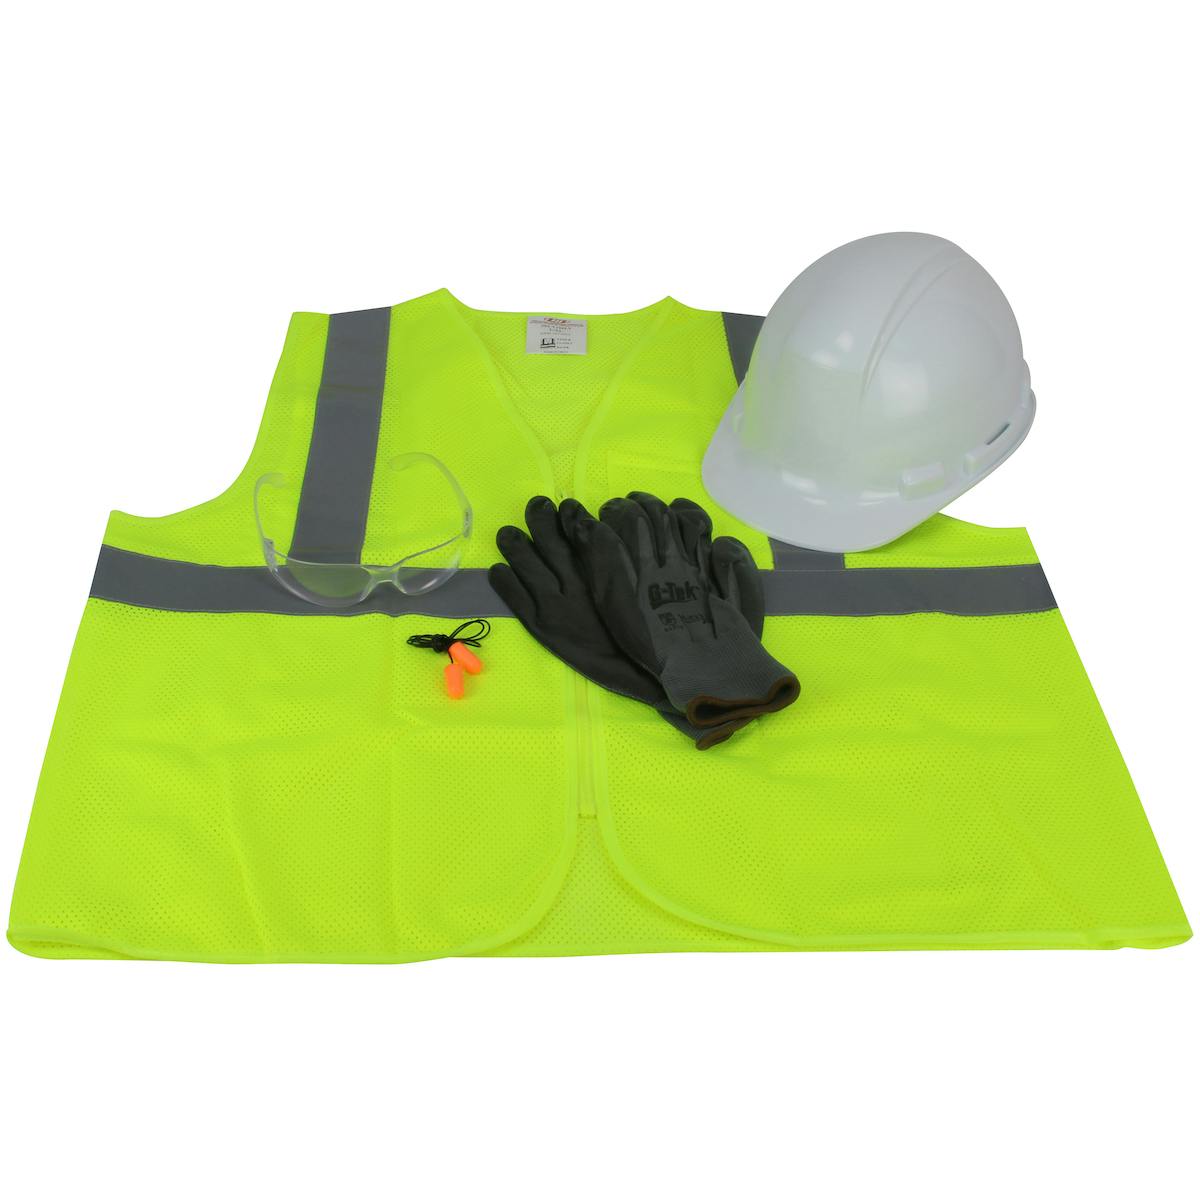 Whistler™ Pre-Packed PPE Kit, HP241 Hat, Safety Eyewear, Earplugs, Gloves and Vest (289-GTW-HP241)_2